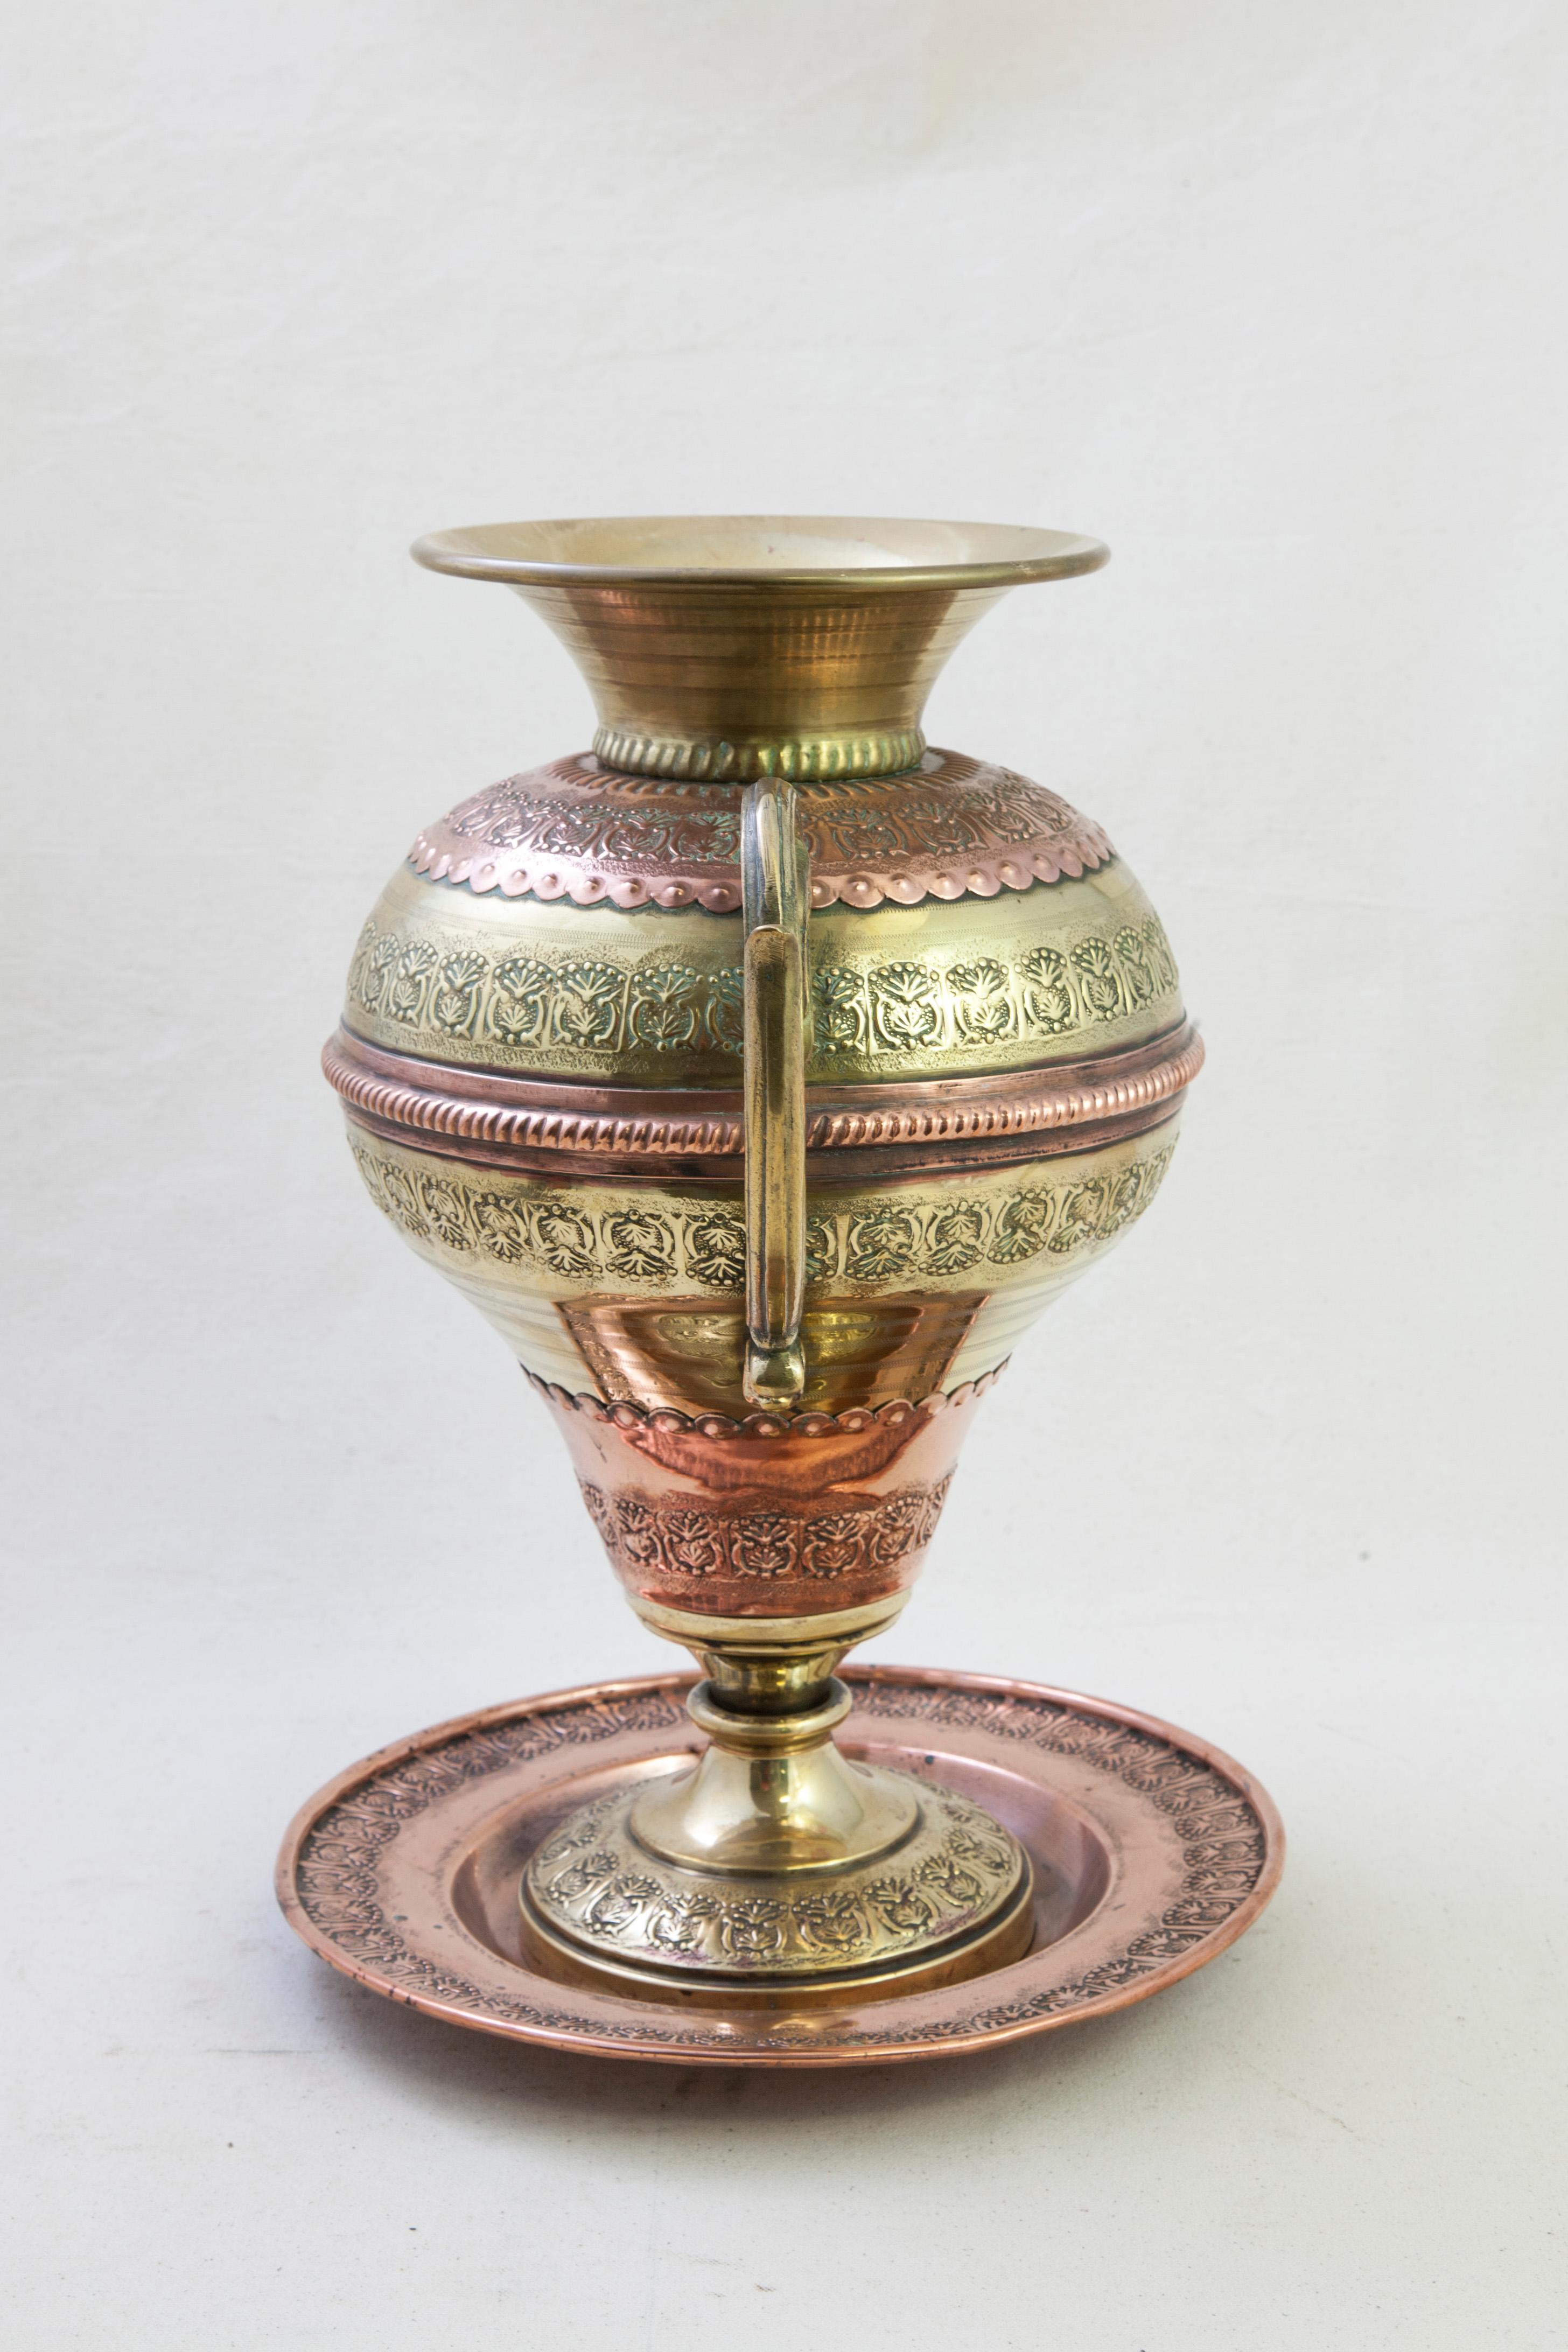 Repoussé French Copper and Brass Urn or Vase with Original Platter Marked Villedieu For Sale